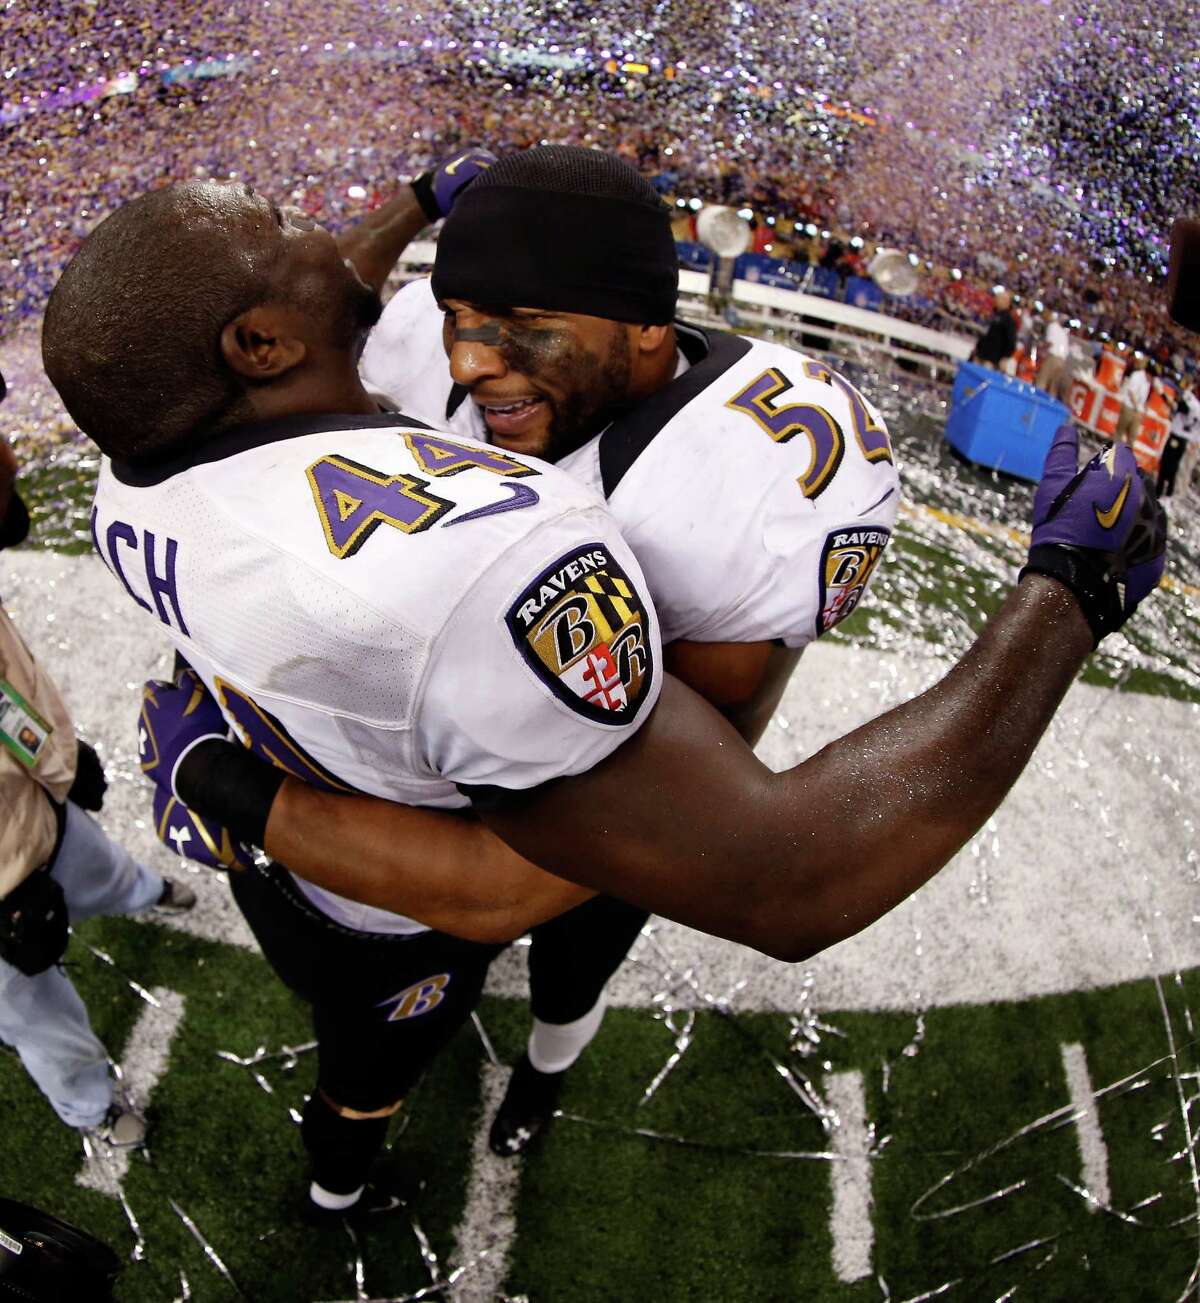 Ravens linebacker Ray Lewis (52) ended his career with a second Super Bowl crown, which he celebrated with ex-Texan Vonta Leach.